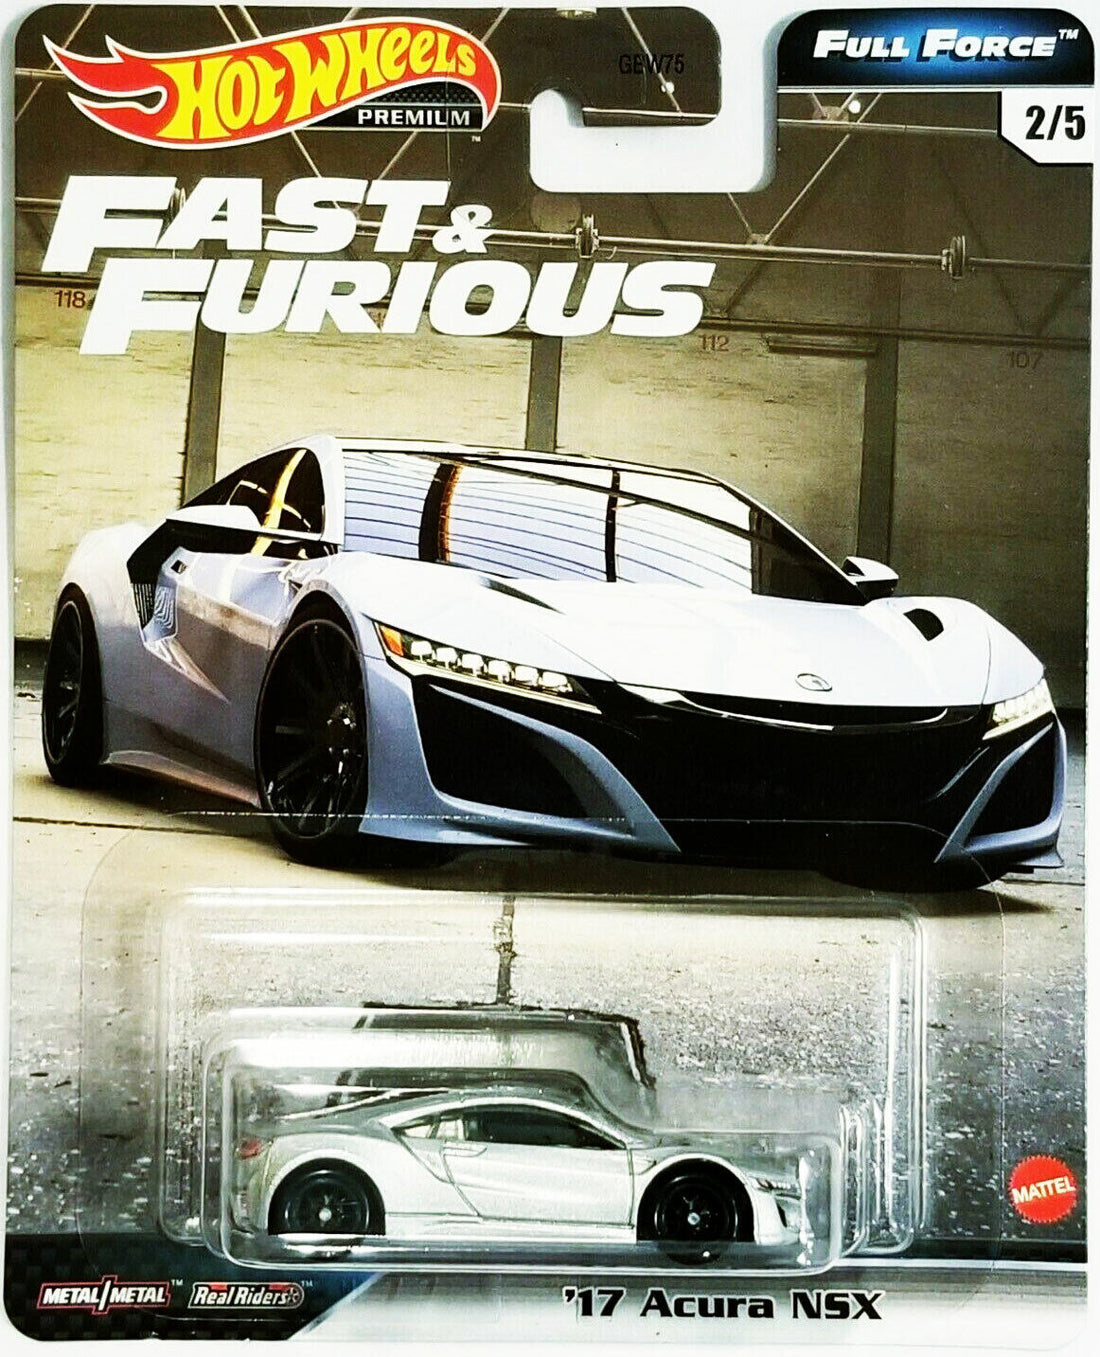 Hot Wheels Fast & Furious Full Force 1:64 Vehicles - Choose Your Ride! 17 Acura NSX #2/5